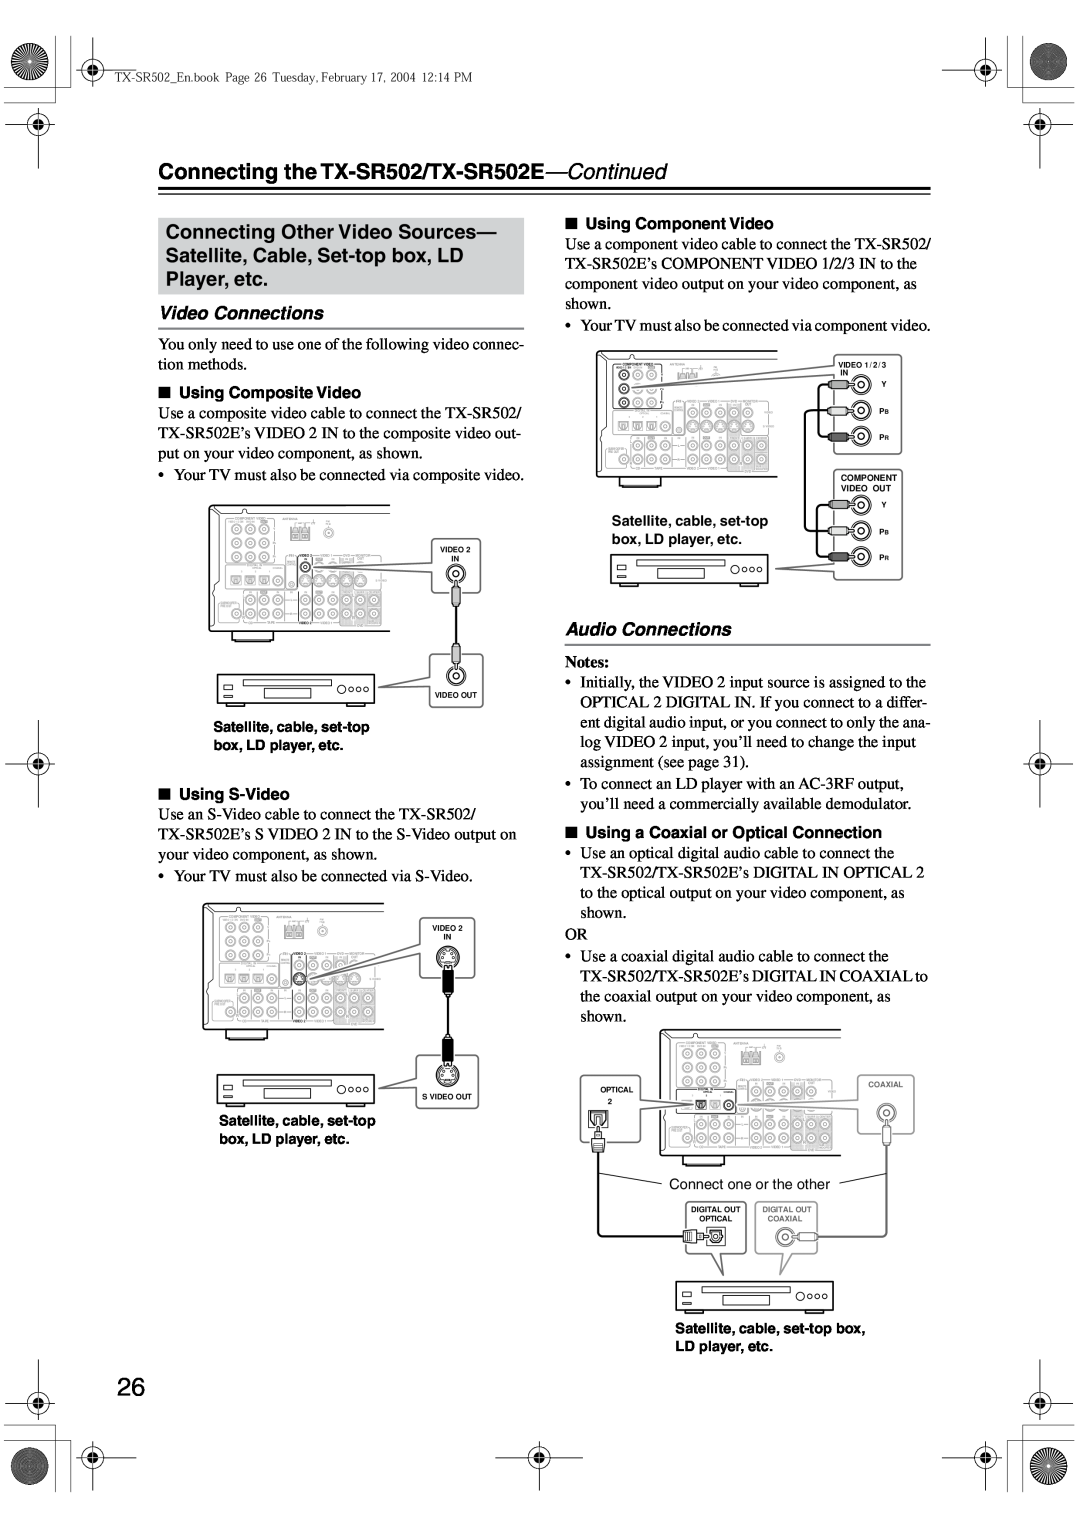 Onkyo instruction manual Connecting the TX-SR502/TX-SR502E-Continued, Video Connections, Audio Connections 